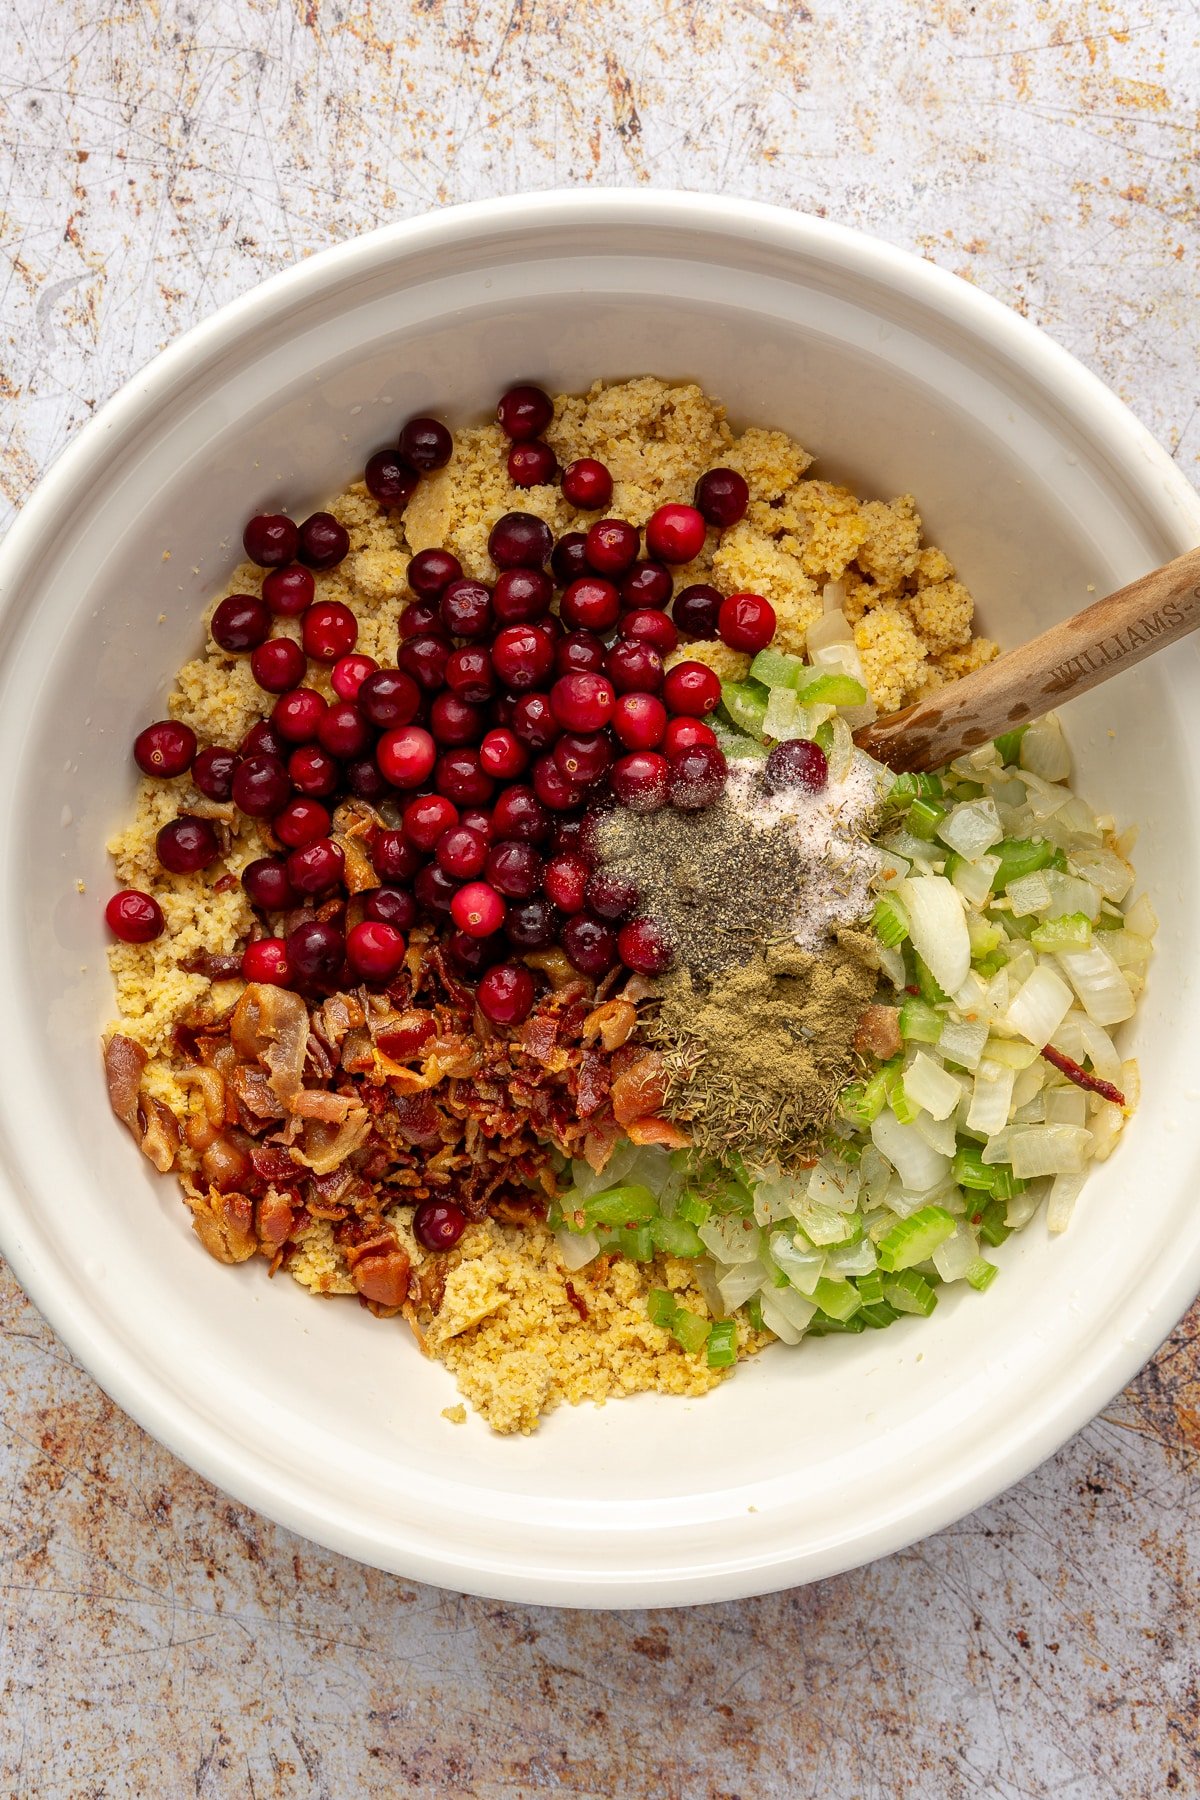 Cranberries, chopped bacon, and a variety of spices have been added to the large, white mixing bowl.